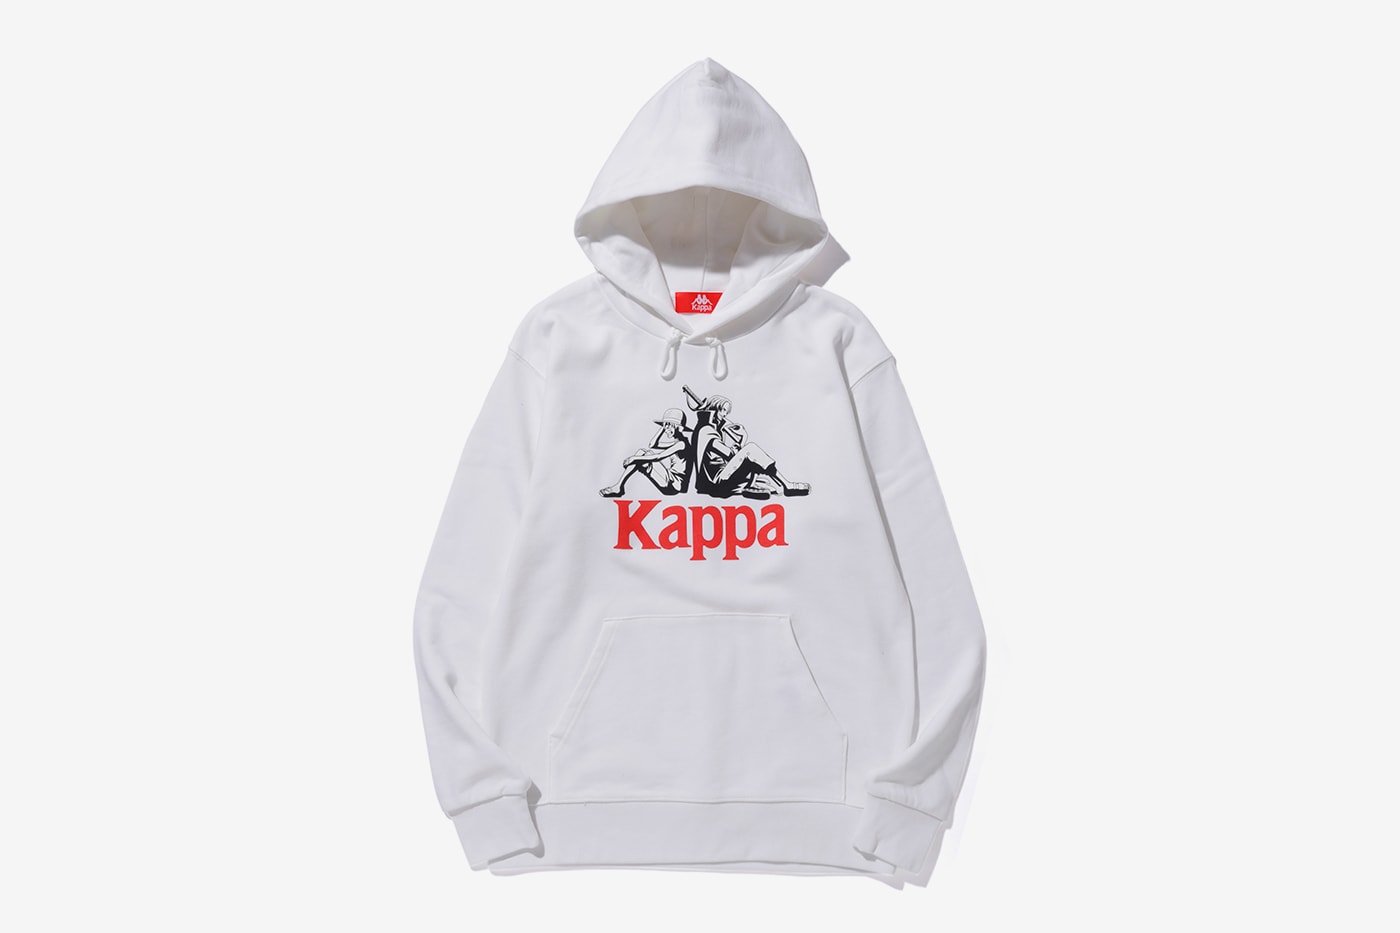 One Piece' x Kappa Capsule Collection Release